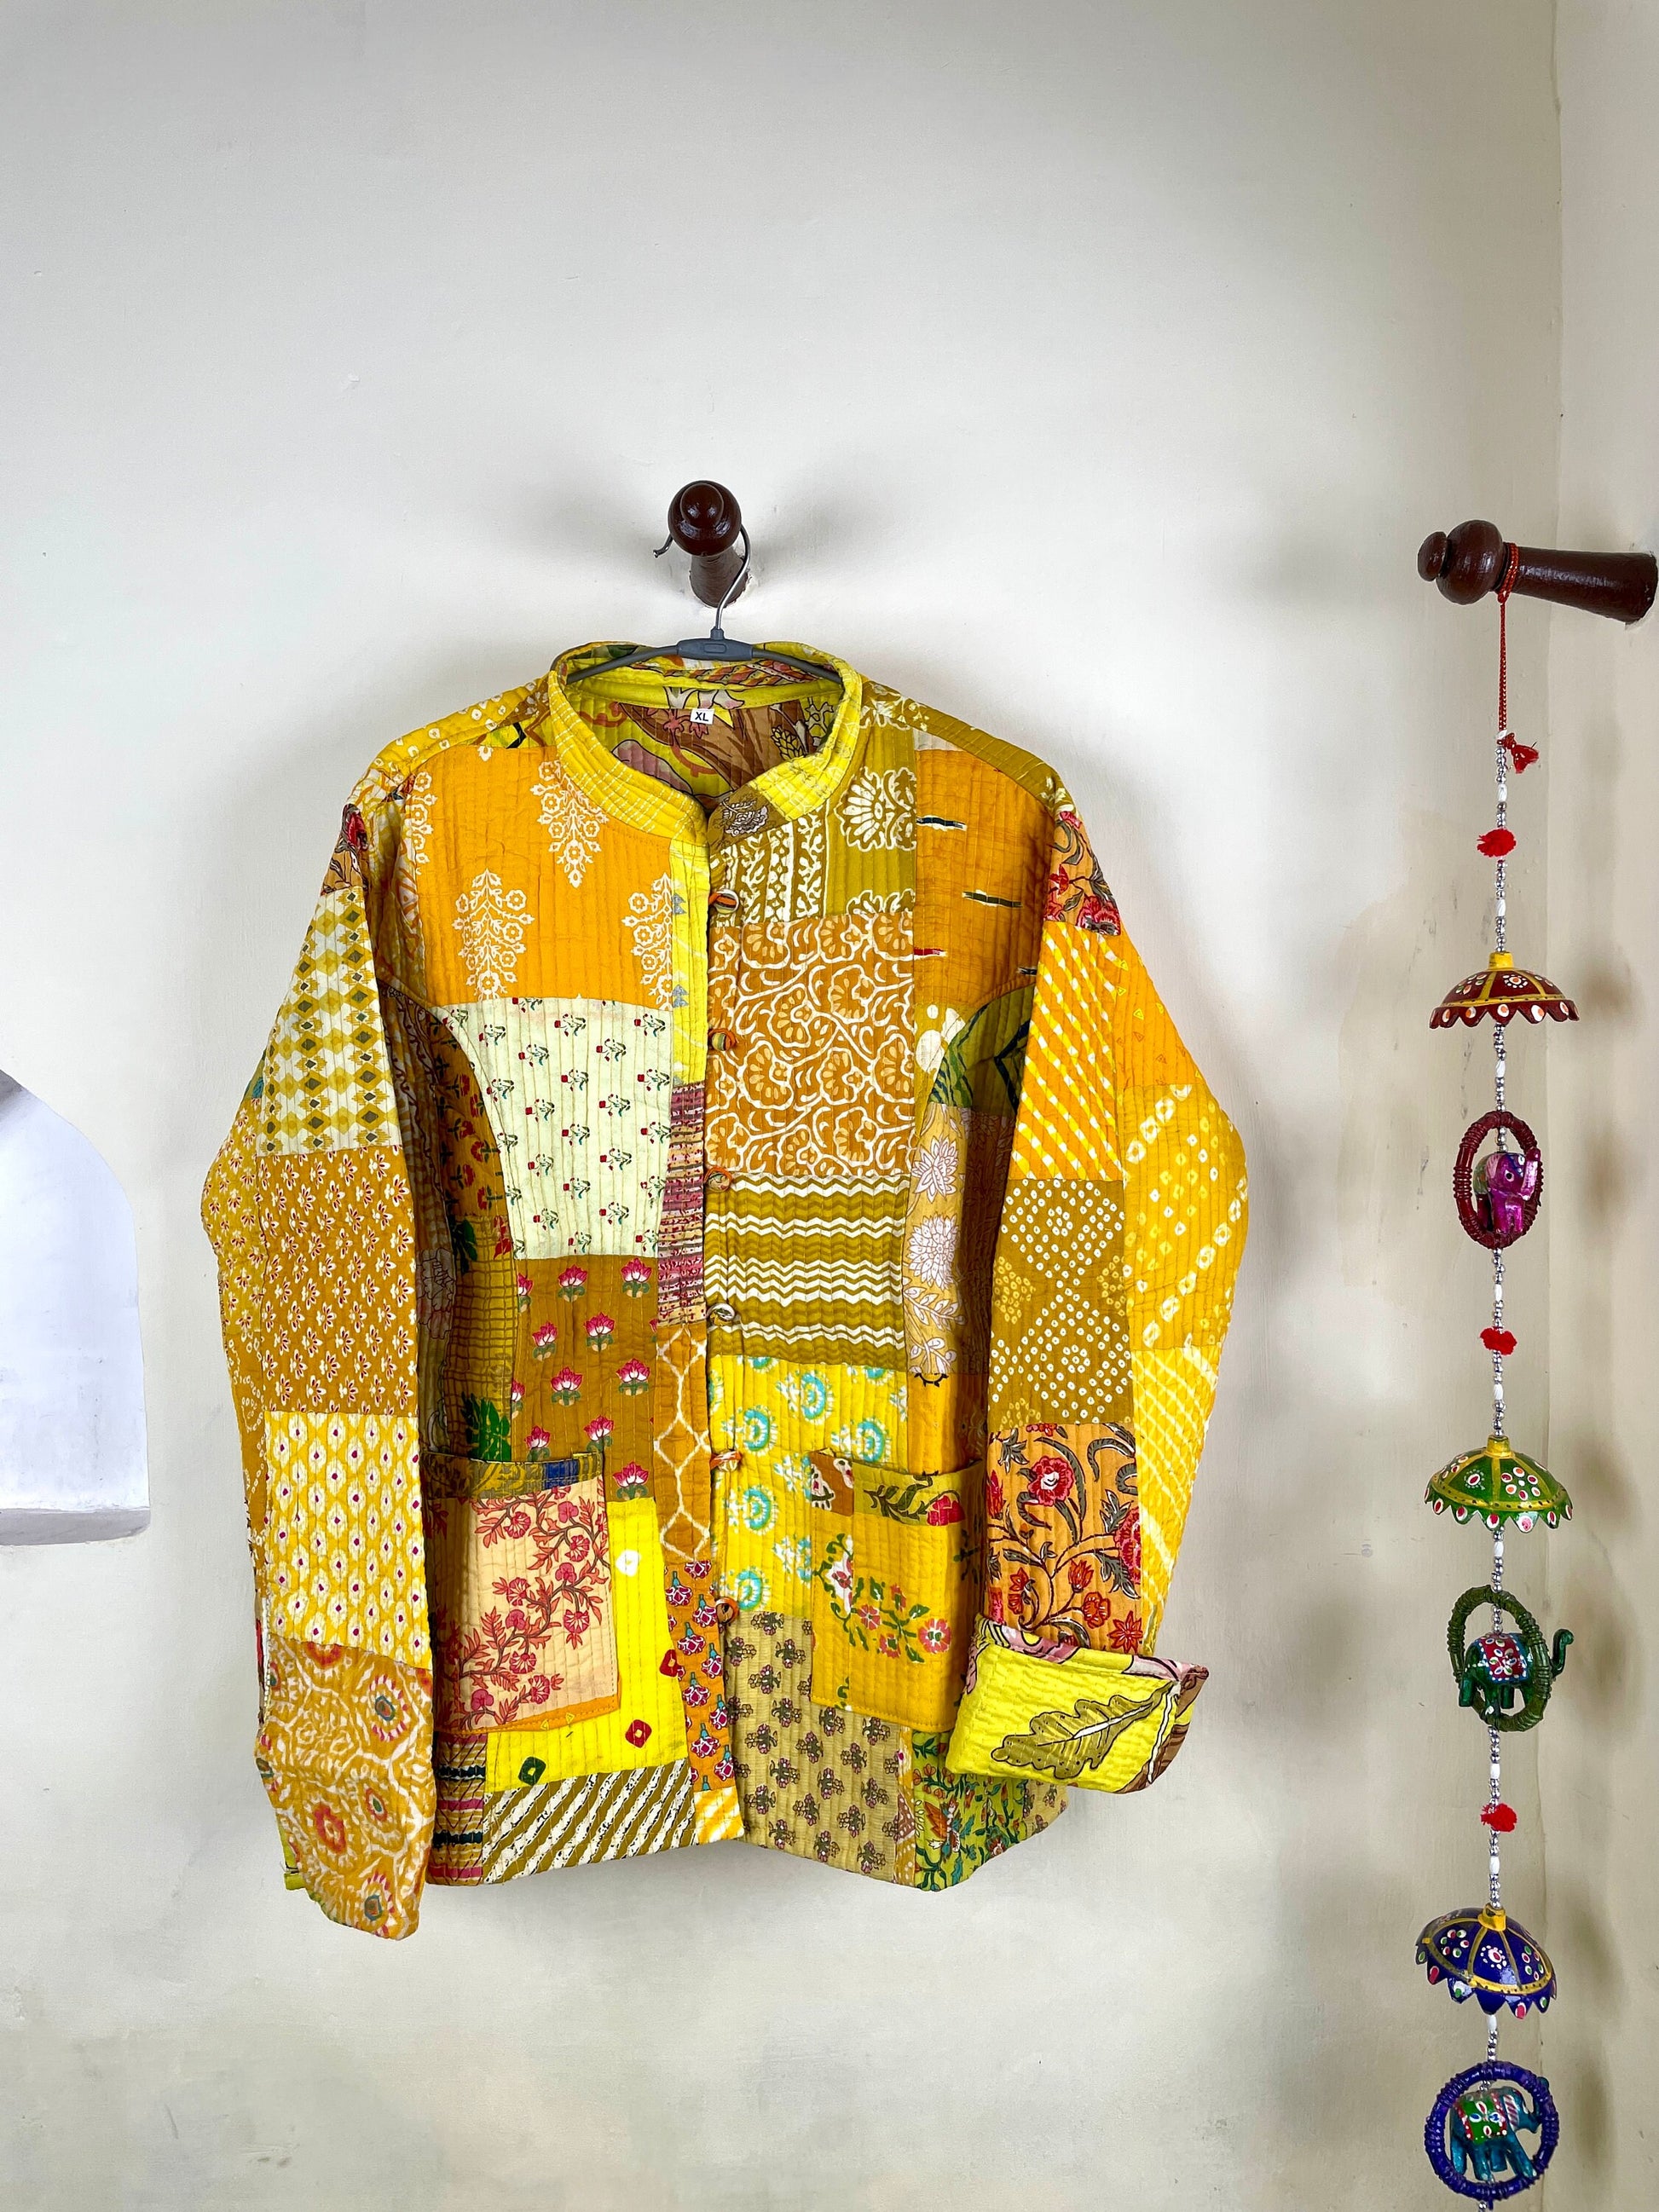 Indian Handmade Quilted Cotton Fabric Jacket Stylish Yellow Women's Coat, Reversible Waistcoat for Her